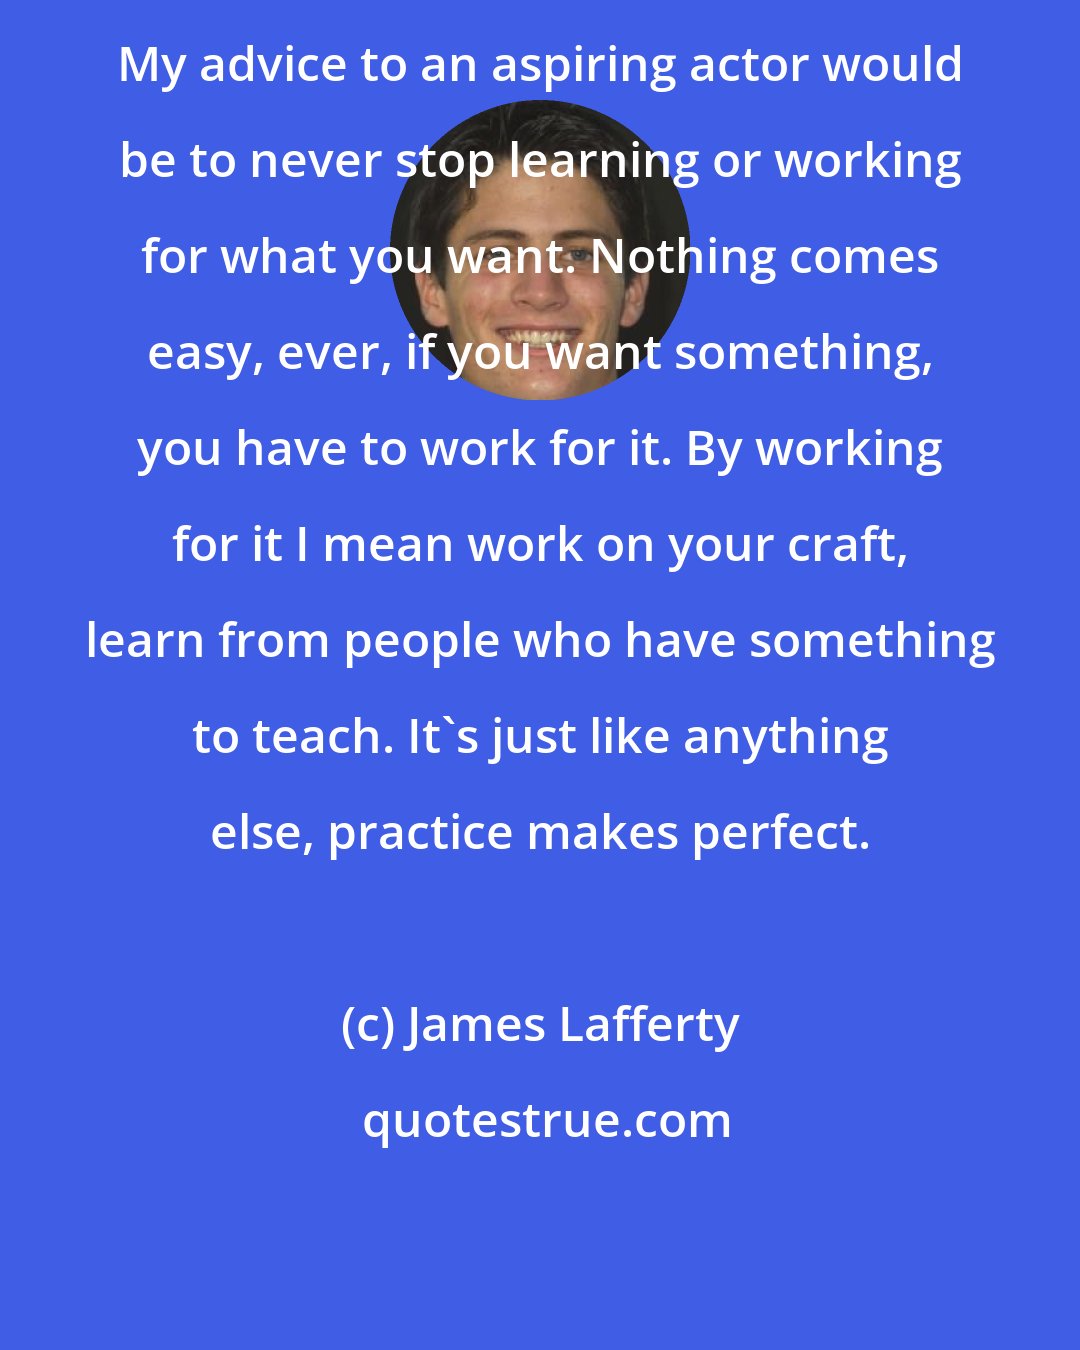 James Lafferty: My advice to an aspiring actor would be to never stop learning or working for what you want. Nothing comes easy, ever, if you want something, you have to work for it. By working for it I mean work on your craft, learn from people who have something to teach. It's just like anything else, practice makes perfect.